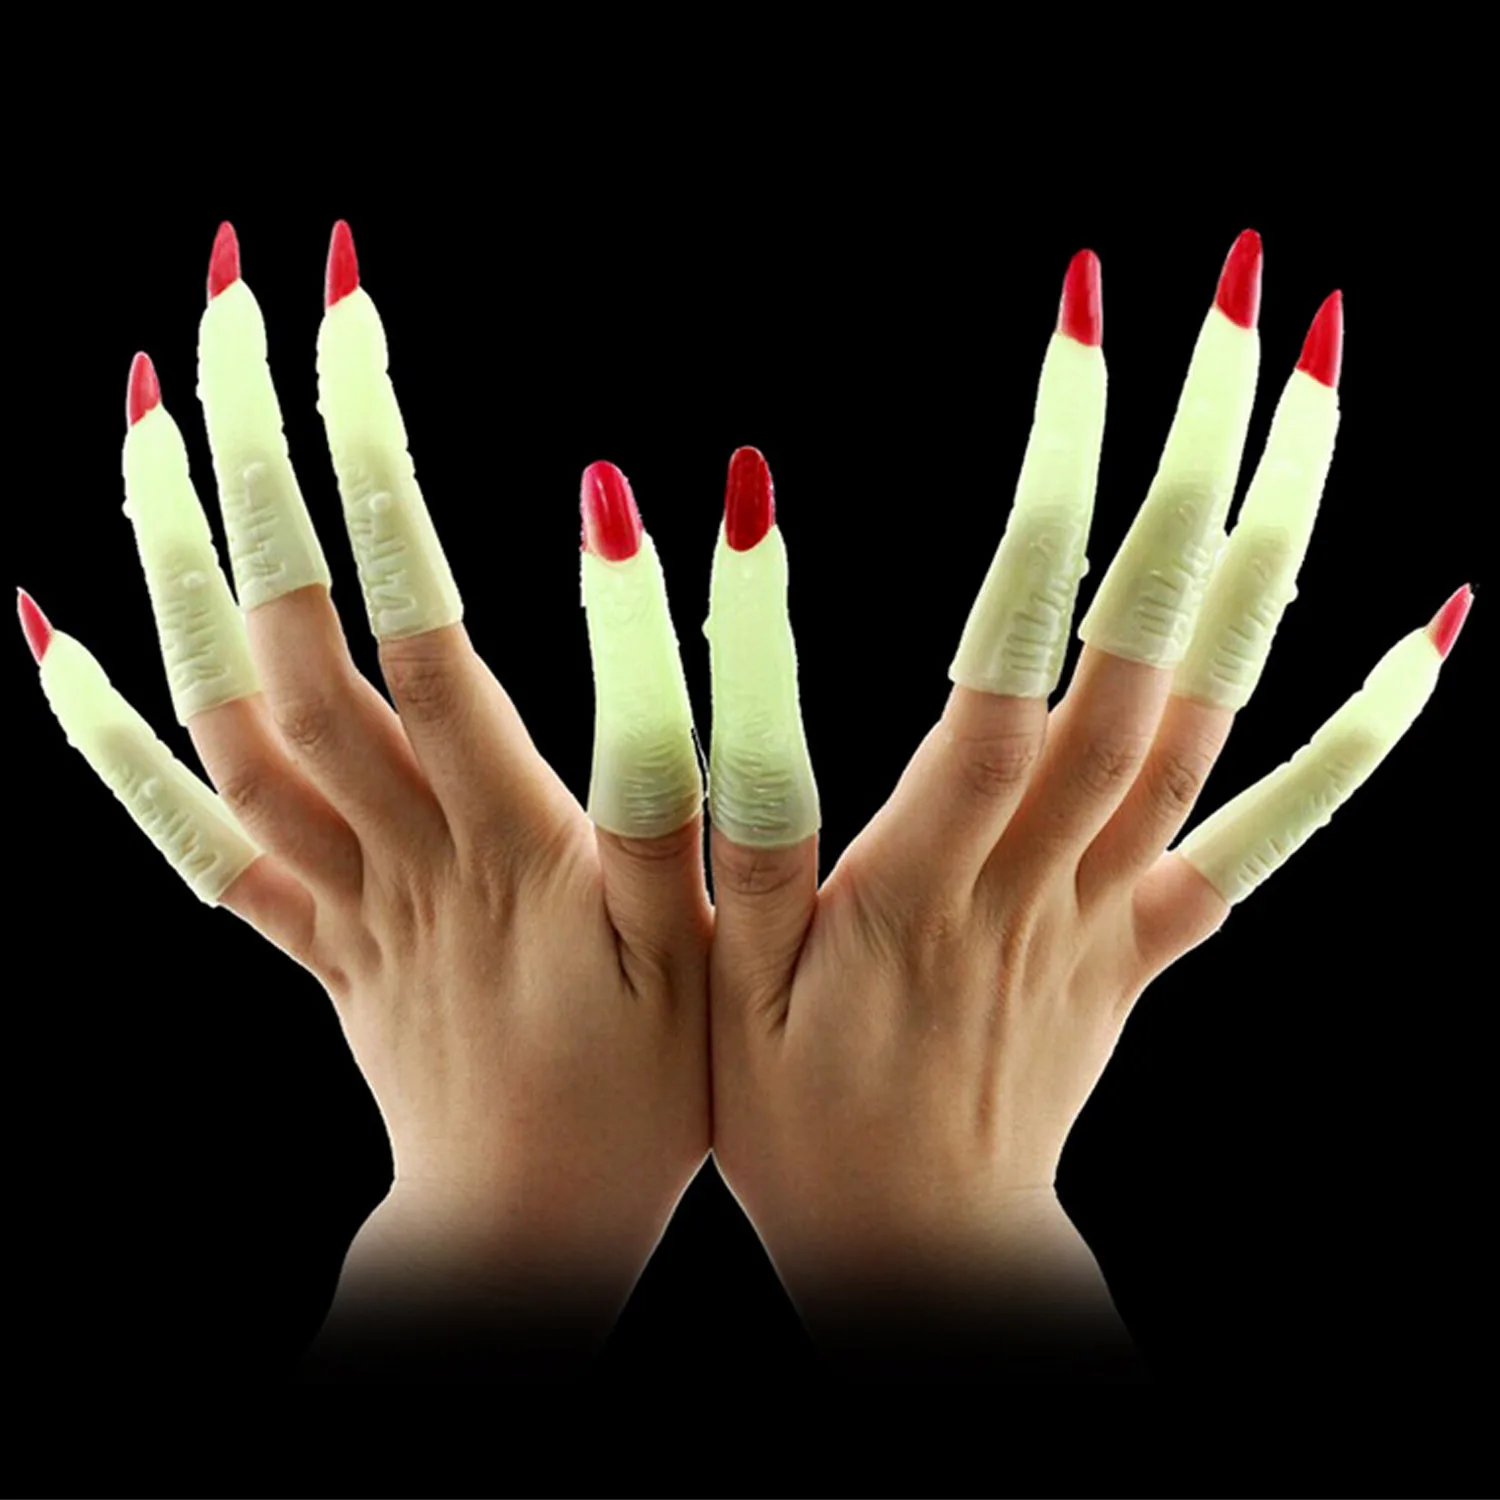 

10 Plastic Luminous Witch Zombie Finger False Nails Glow in the Dark Vampire Nails Toy for Halloween Party Gatherings Carnivals